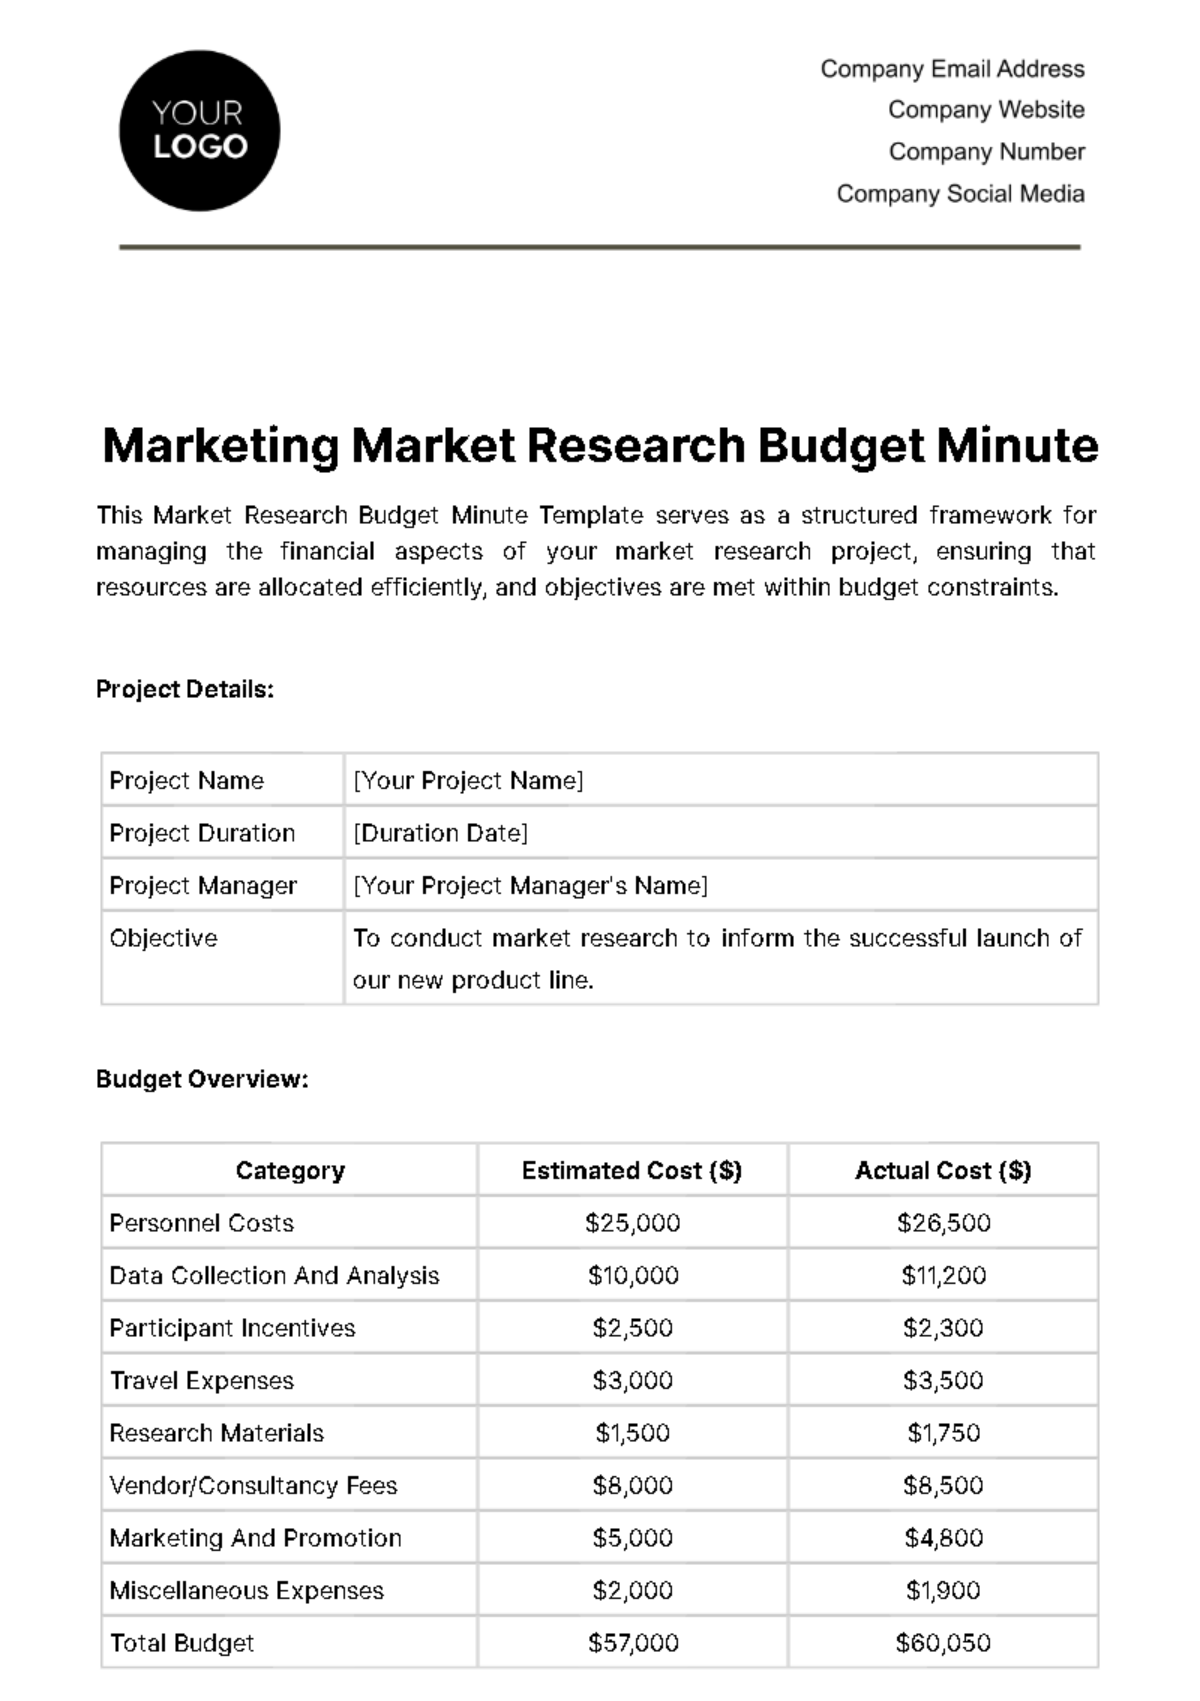 Market Research Budget Minute Template